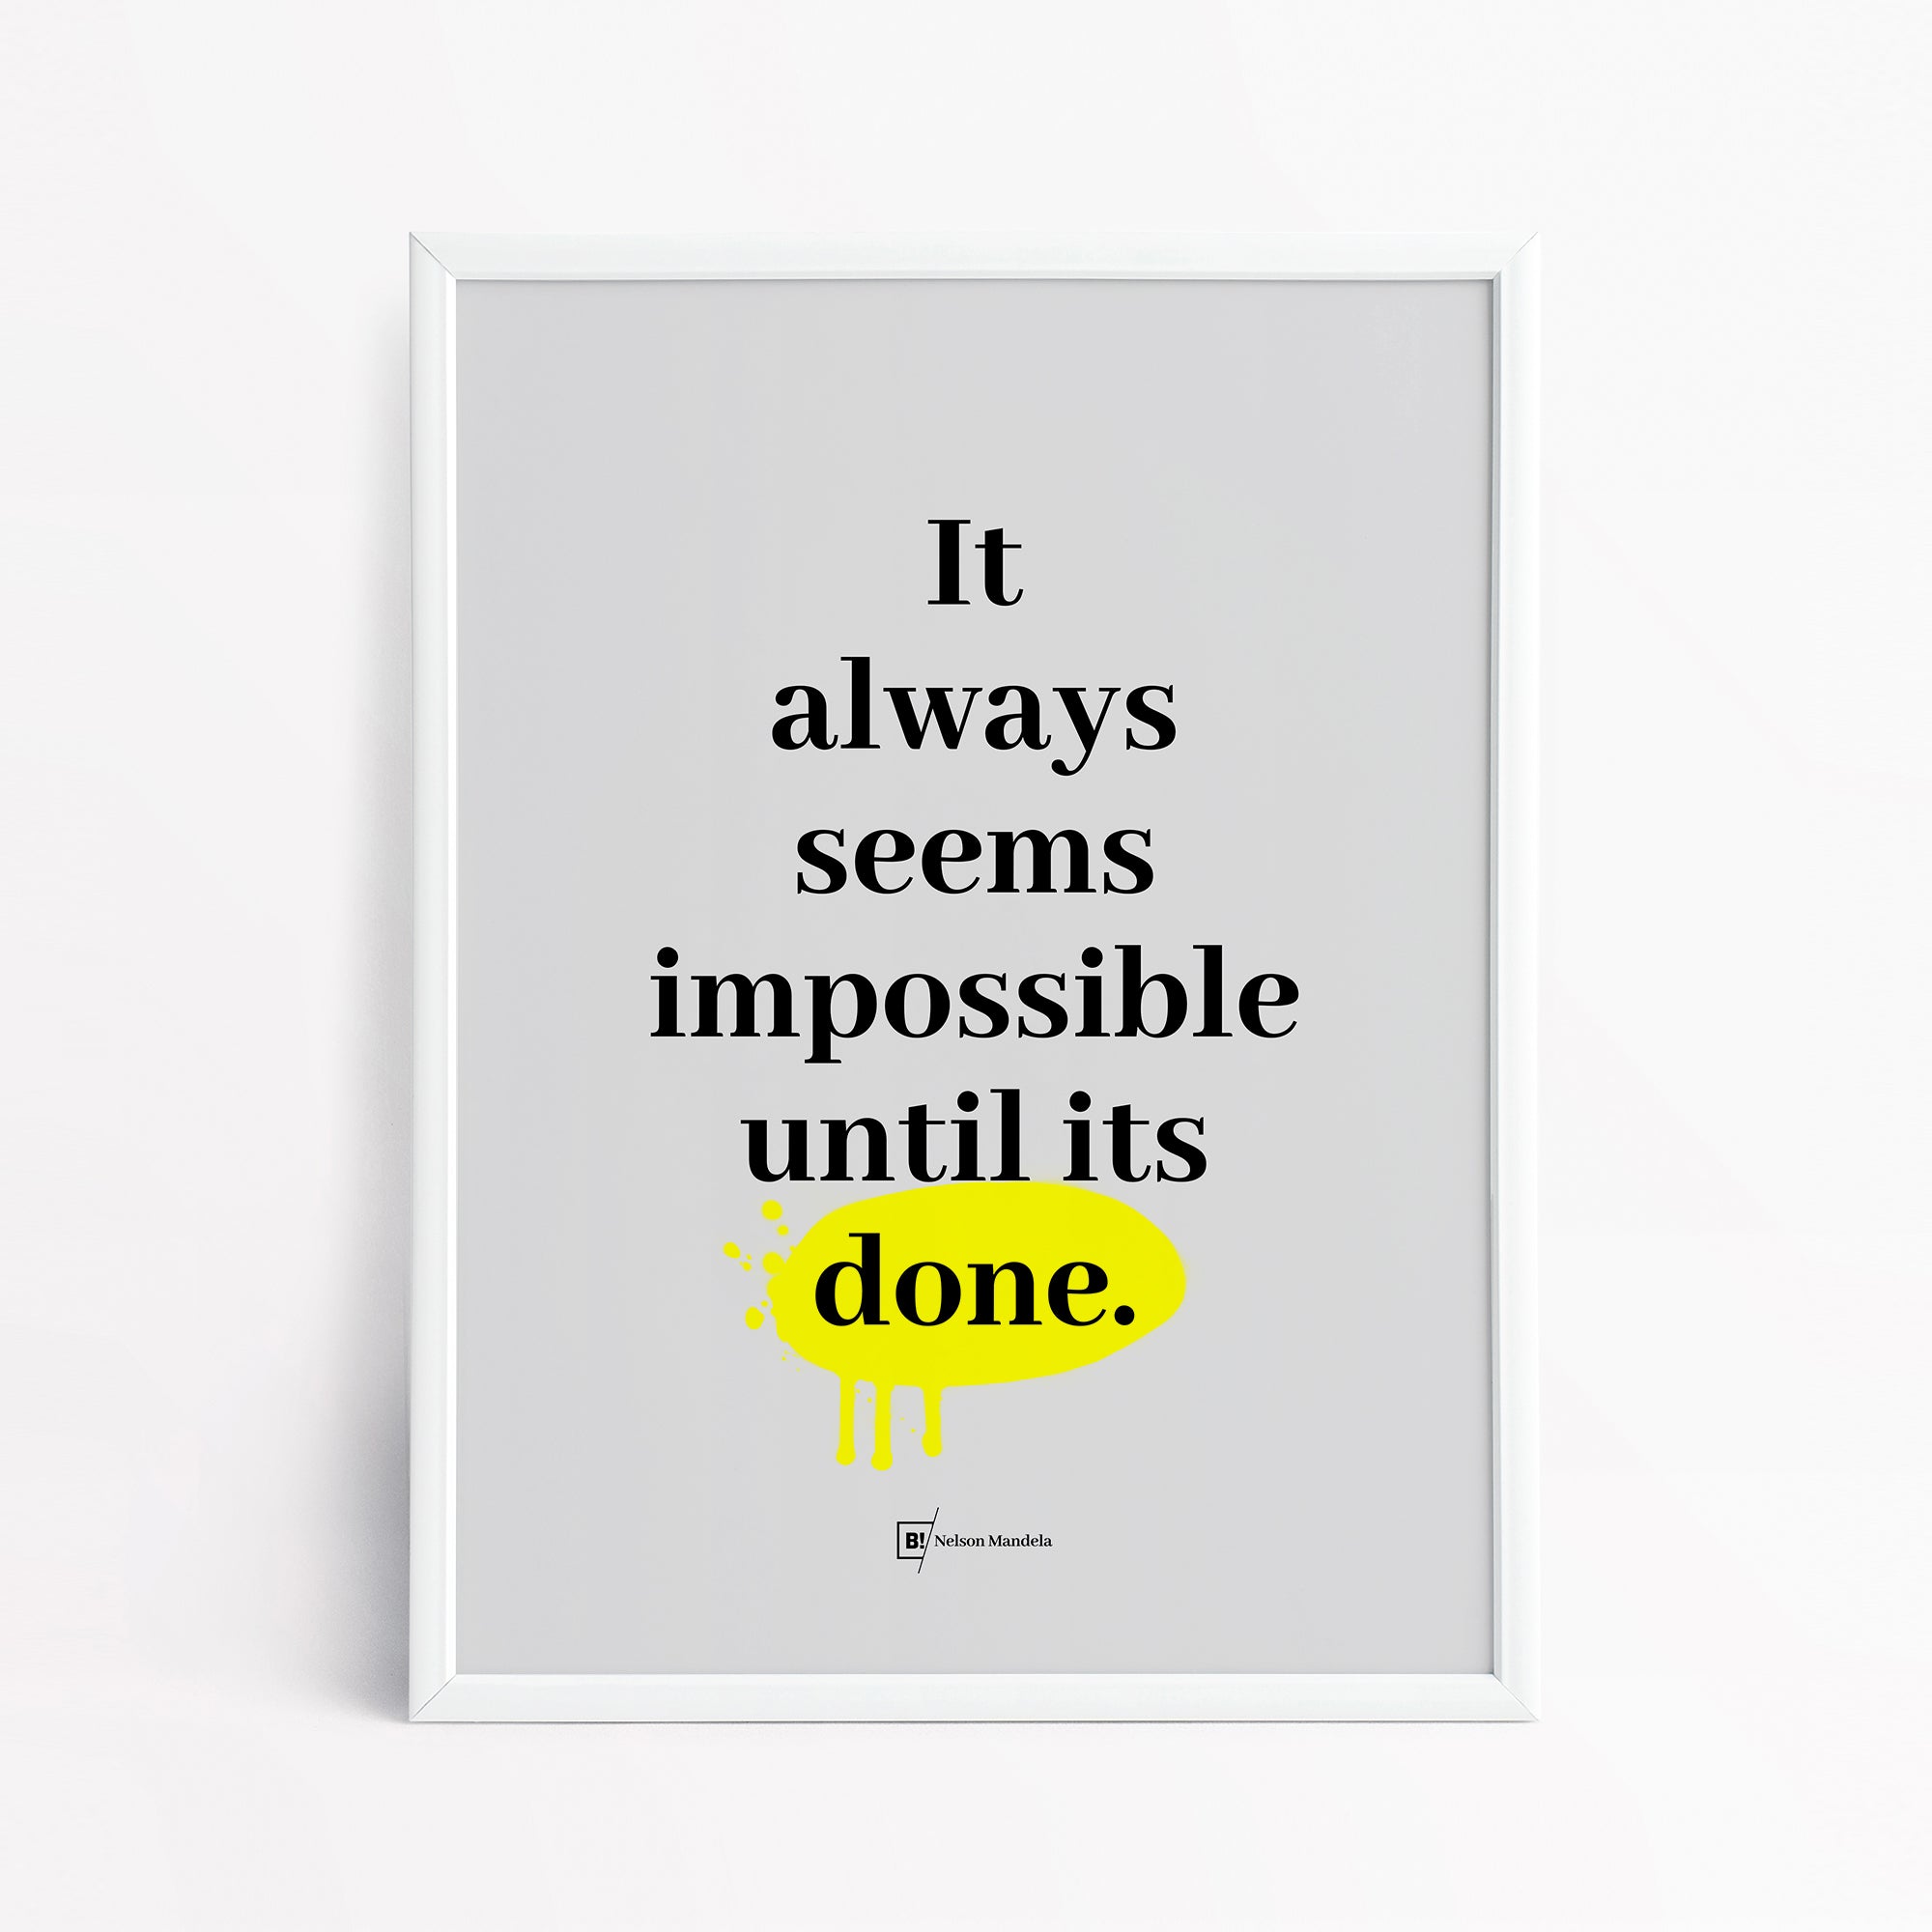 Be inspired by Nelson Mandela's famous "It always seems impossible until its done" quote art print. This artwork was printed using the giclée process on archival acid-free paper and is presented in a simple white frame that captures its timeless beauty in every detail.